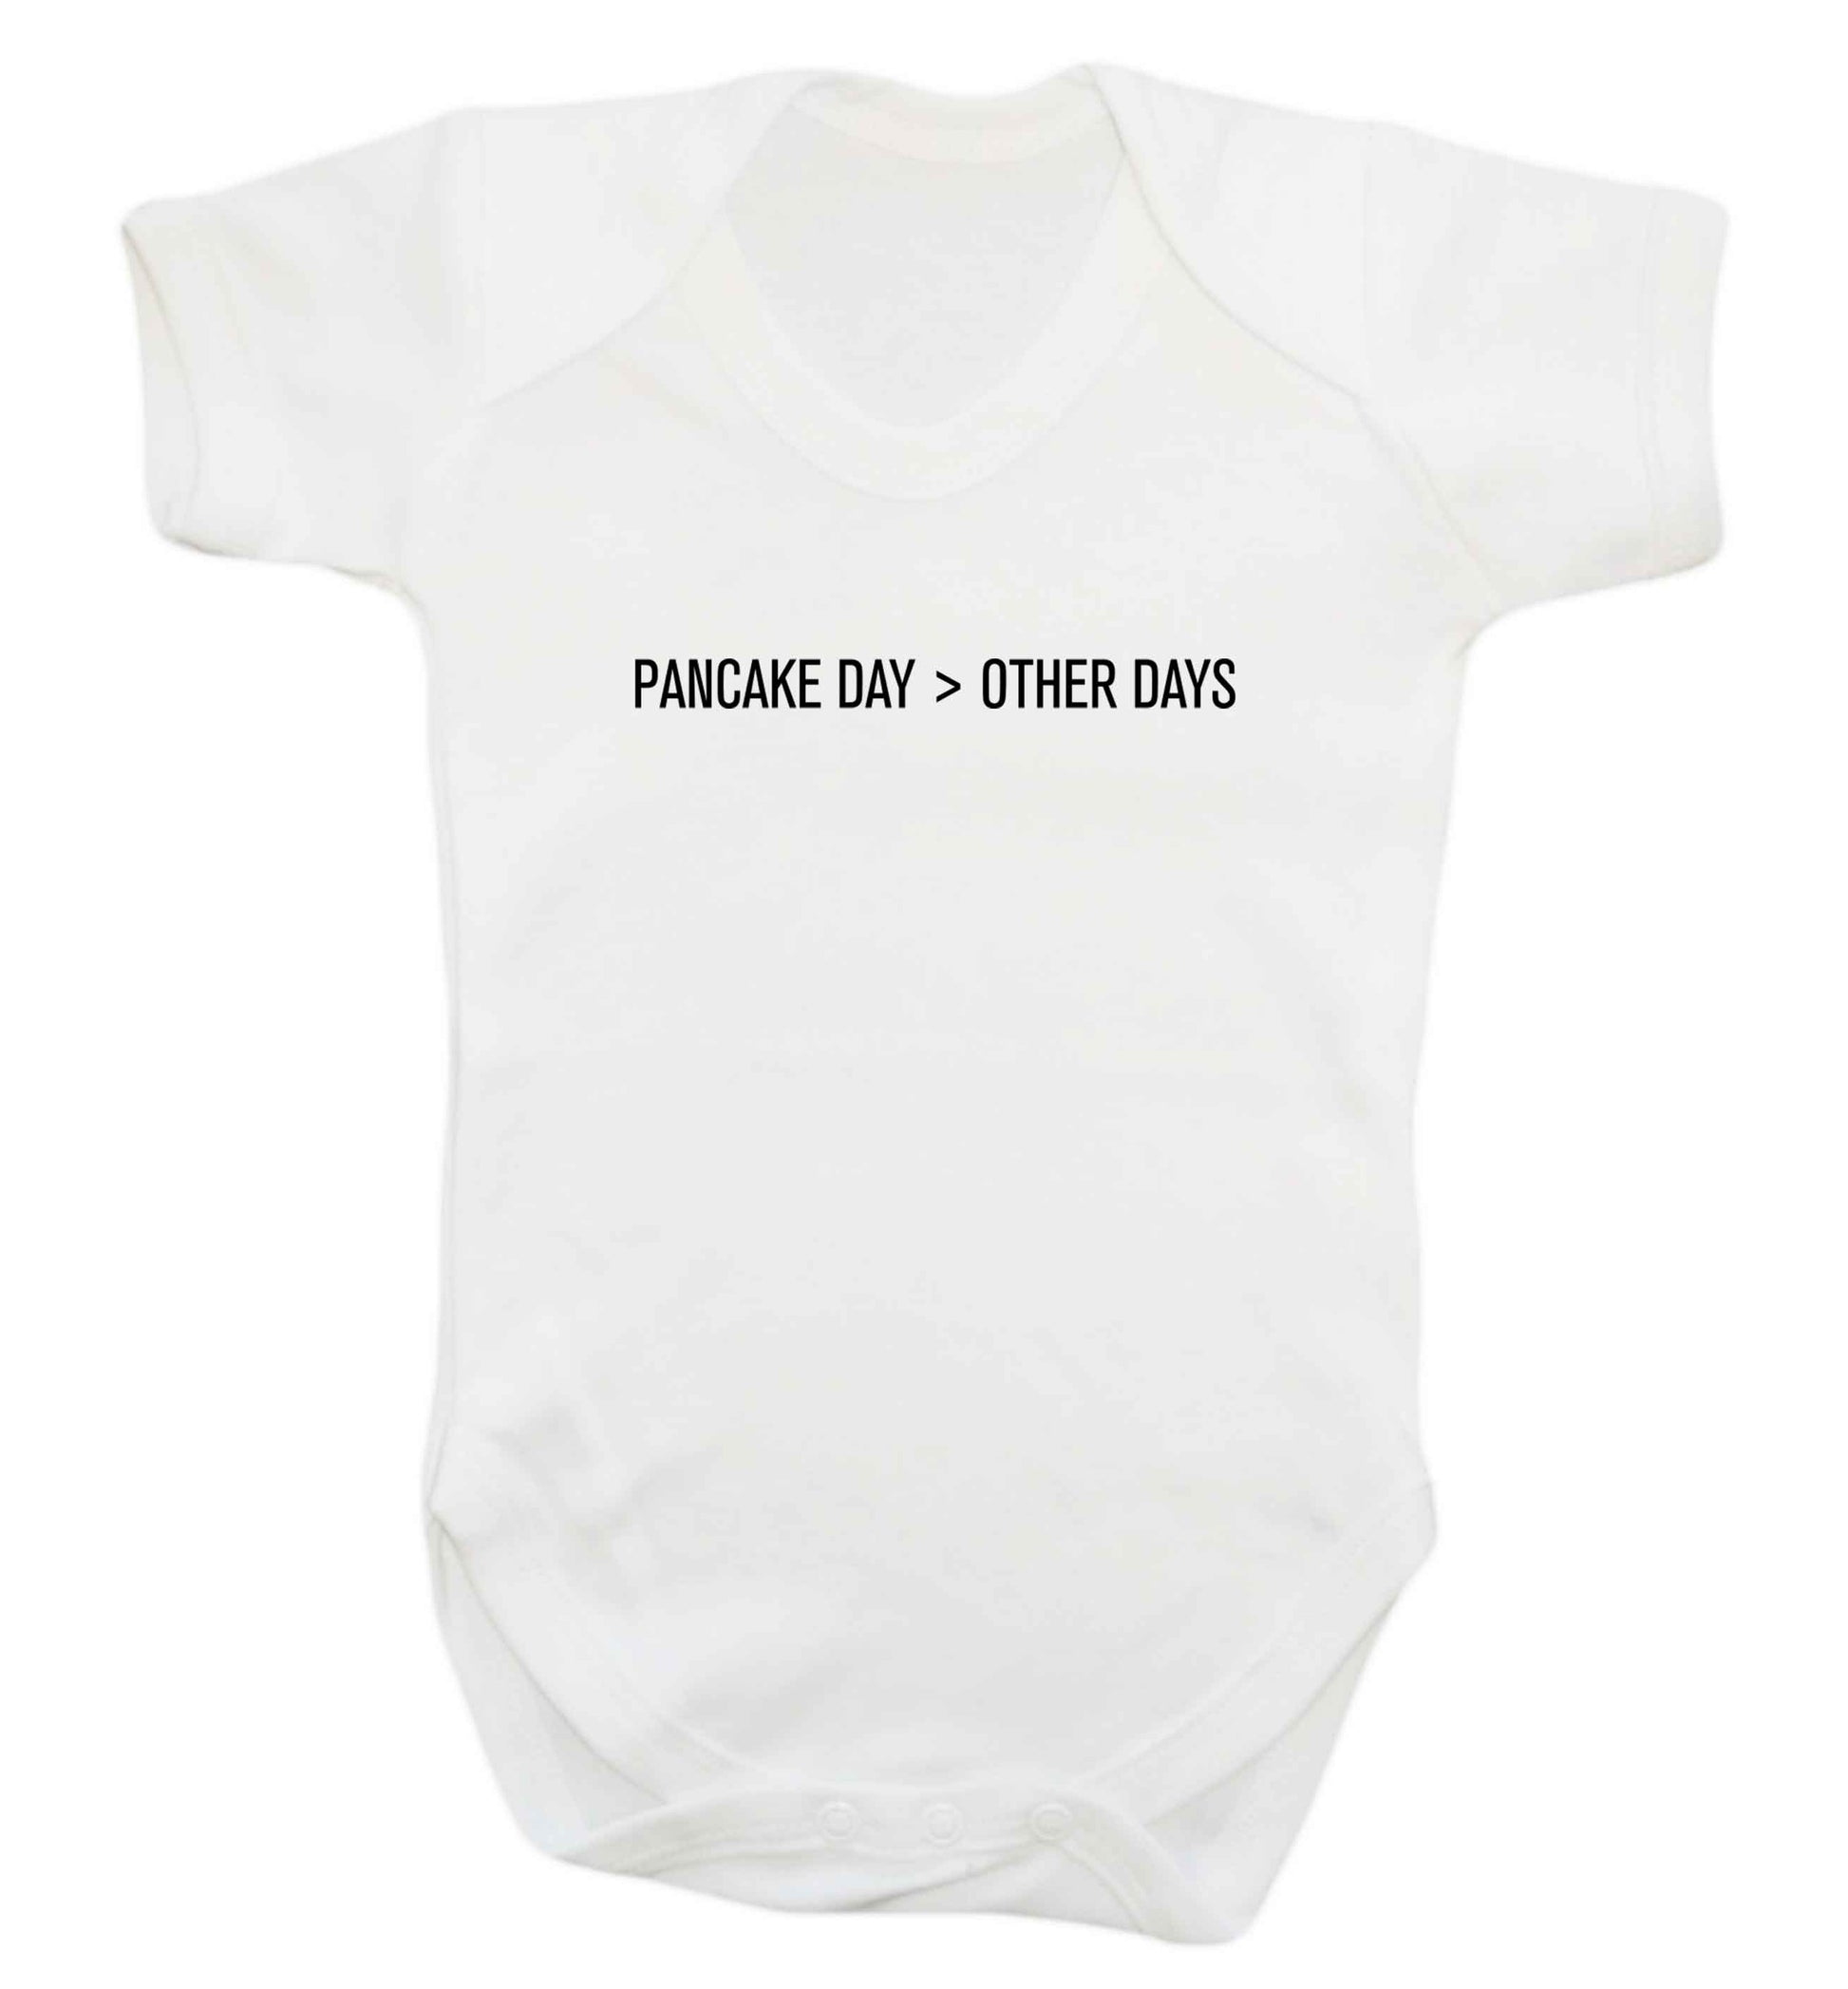 Pancake day > other days baby vest white 18-24 months